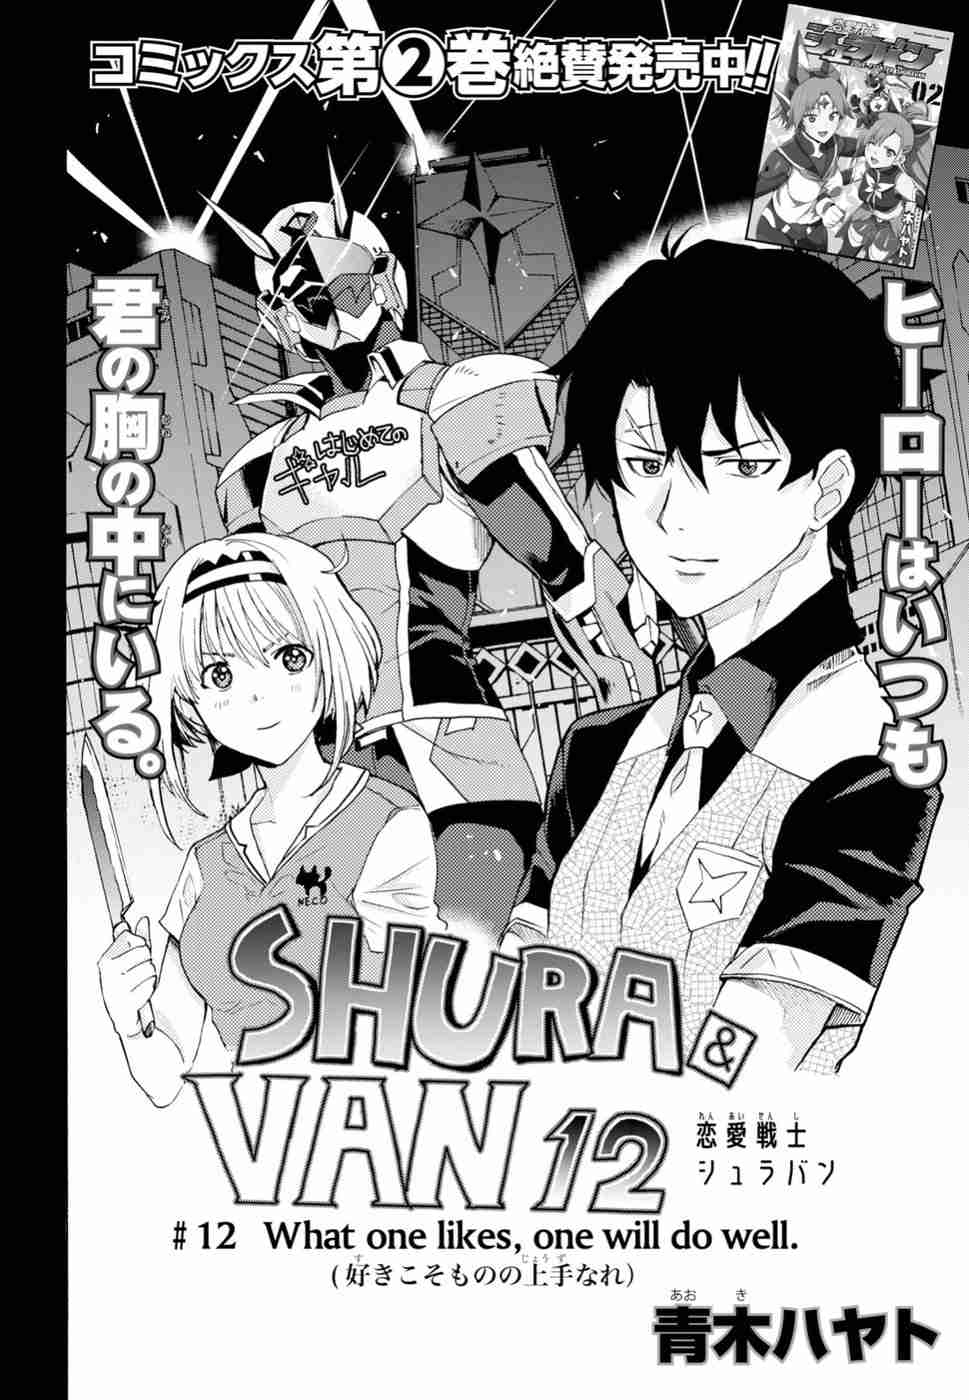 Love Fighter Shuravan Vol. 3 Ch. 12 What one likes, one will do well